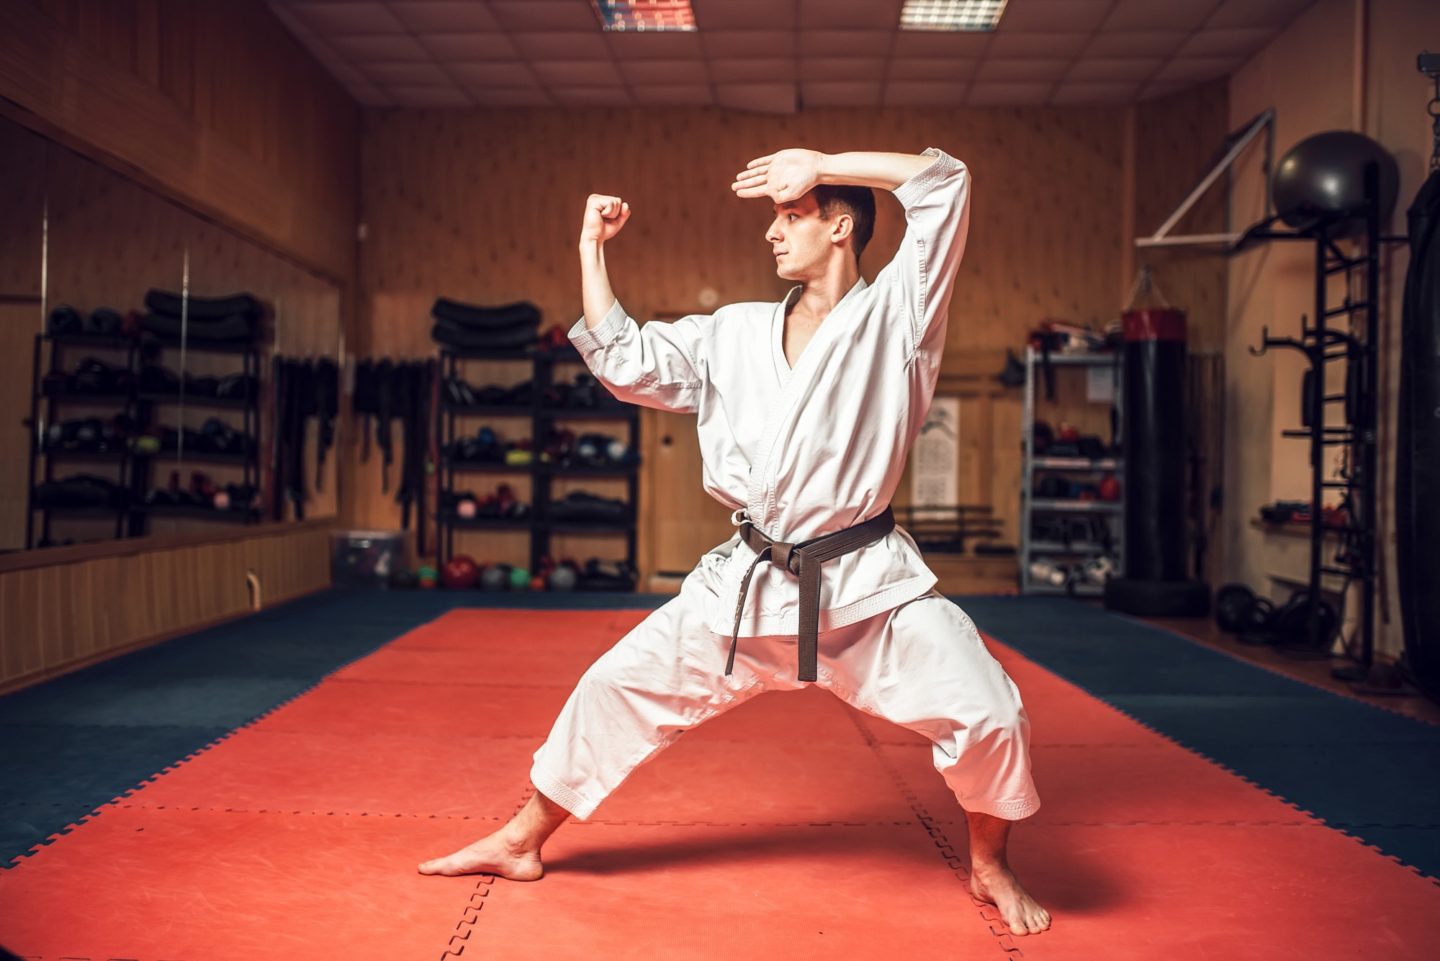 Martial arts master on fight training in gym